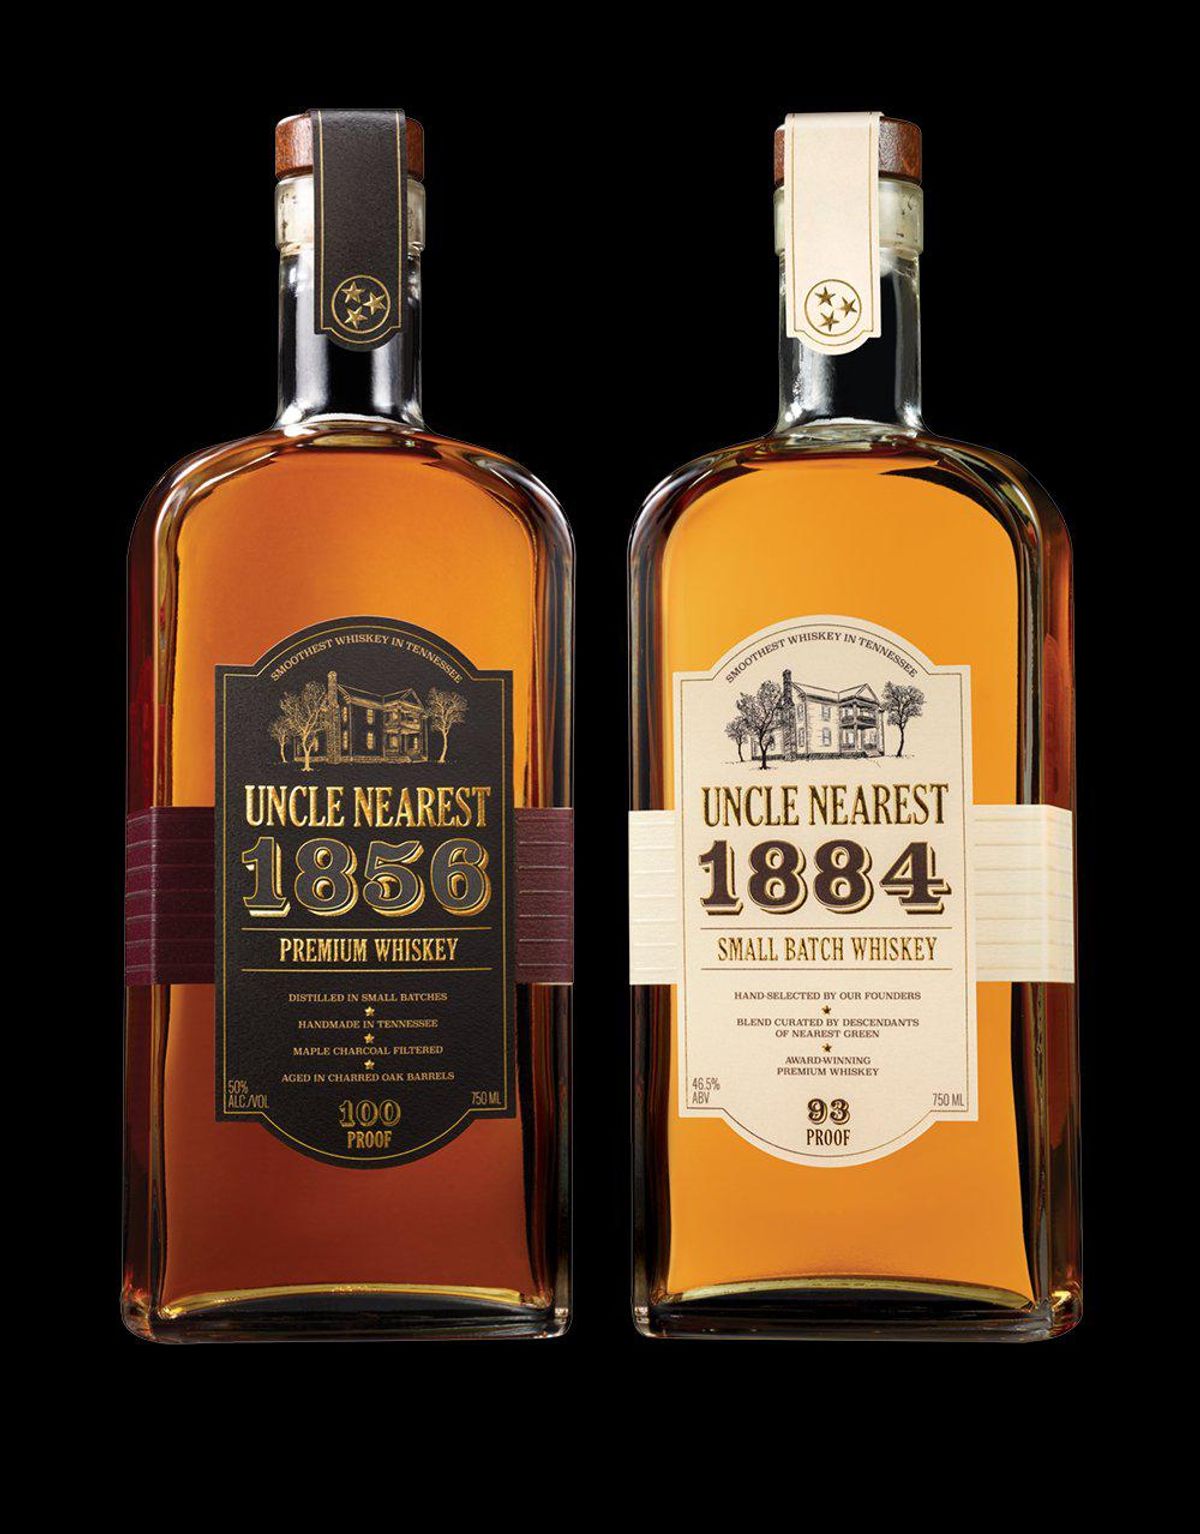 1856 Premium Aged Whiskey and 1884 Small Batch Whiskey